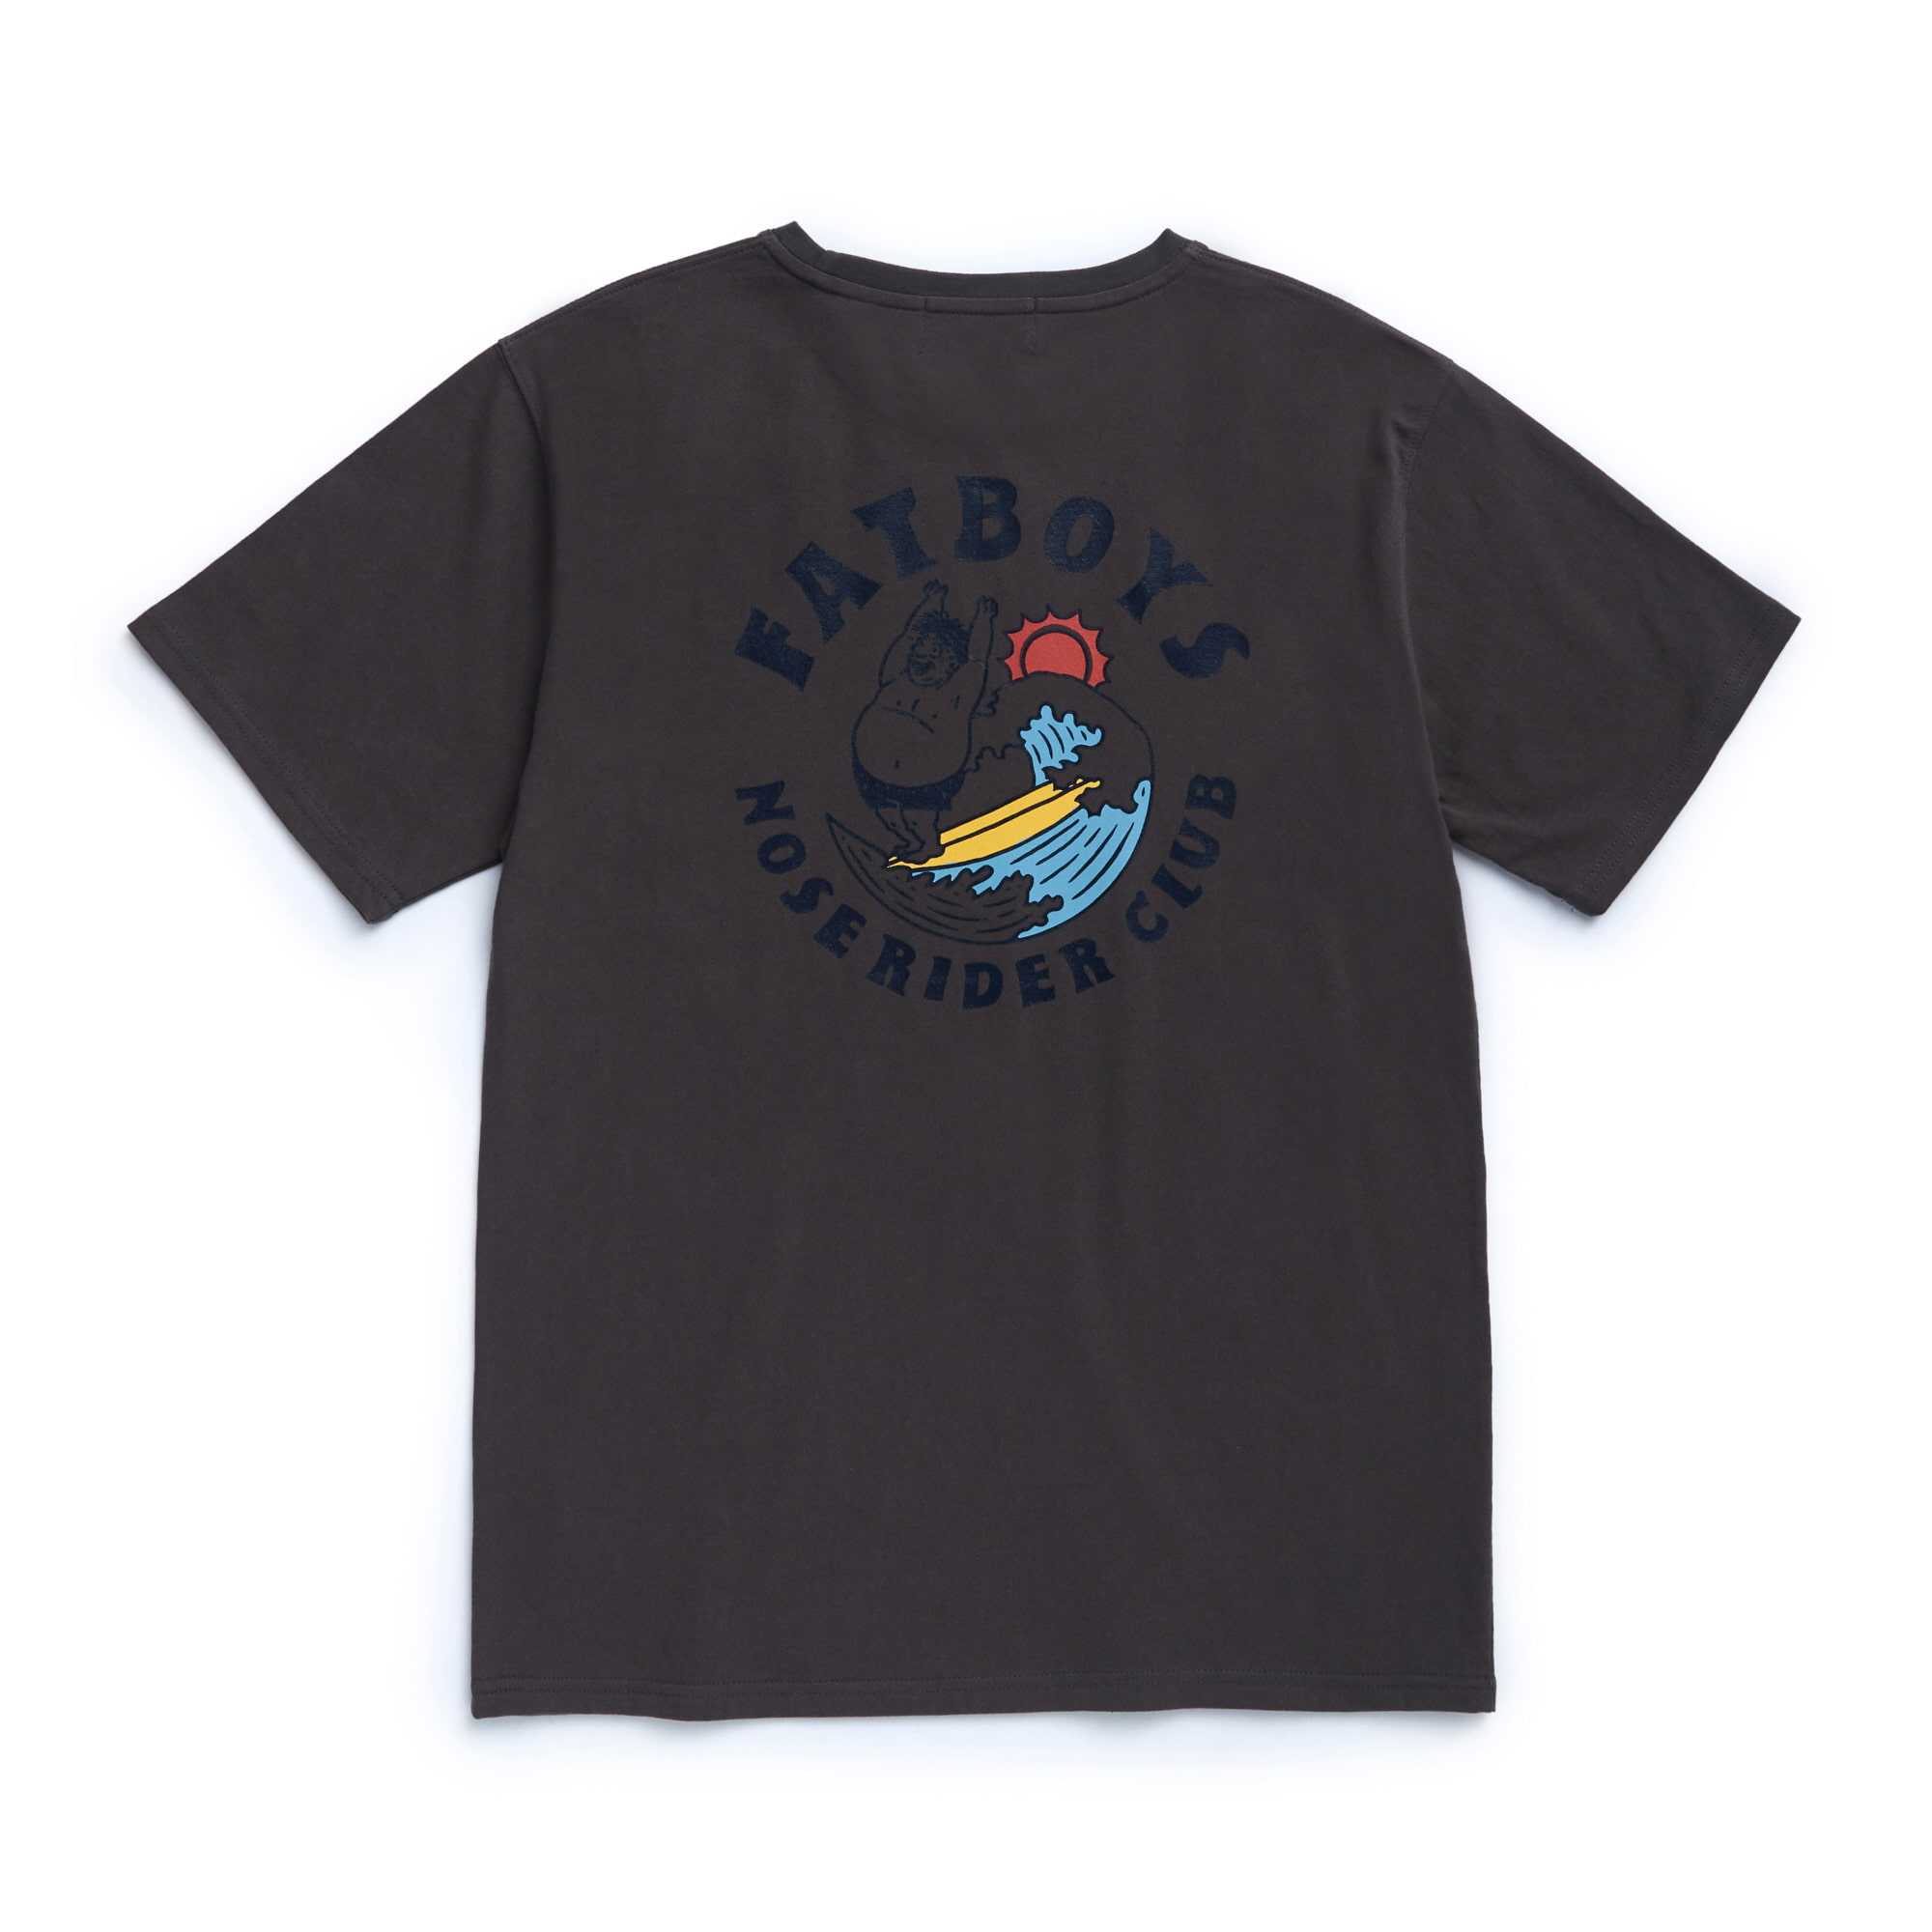 [Blowind] FATBOYS NOSERIDER CLUB Tee (Charcoal) (60% Sale)